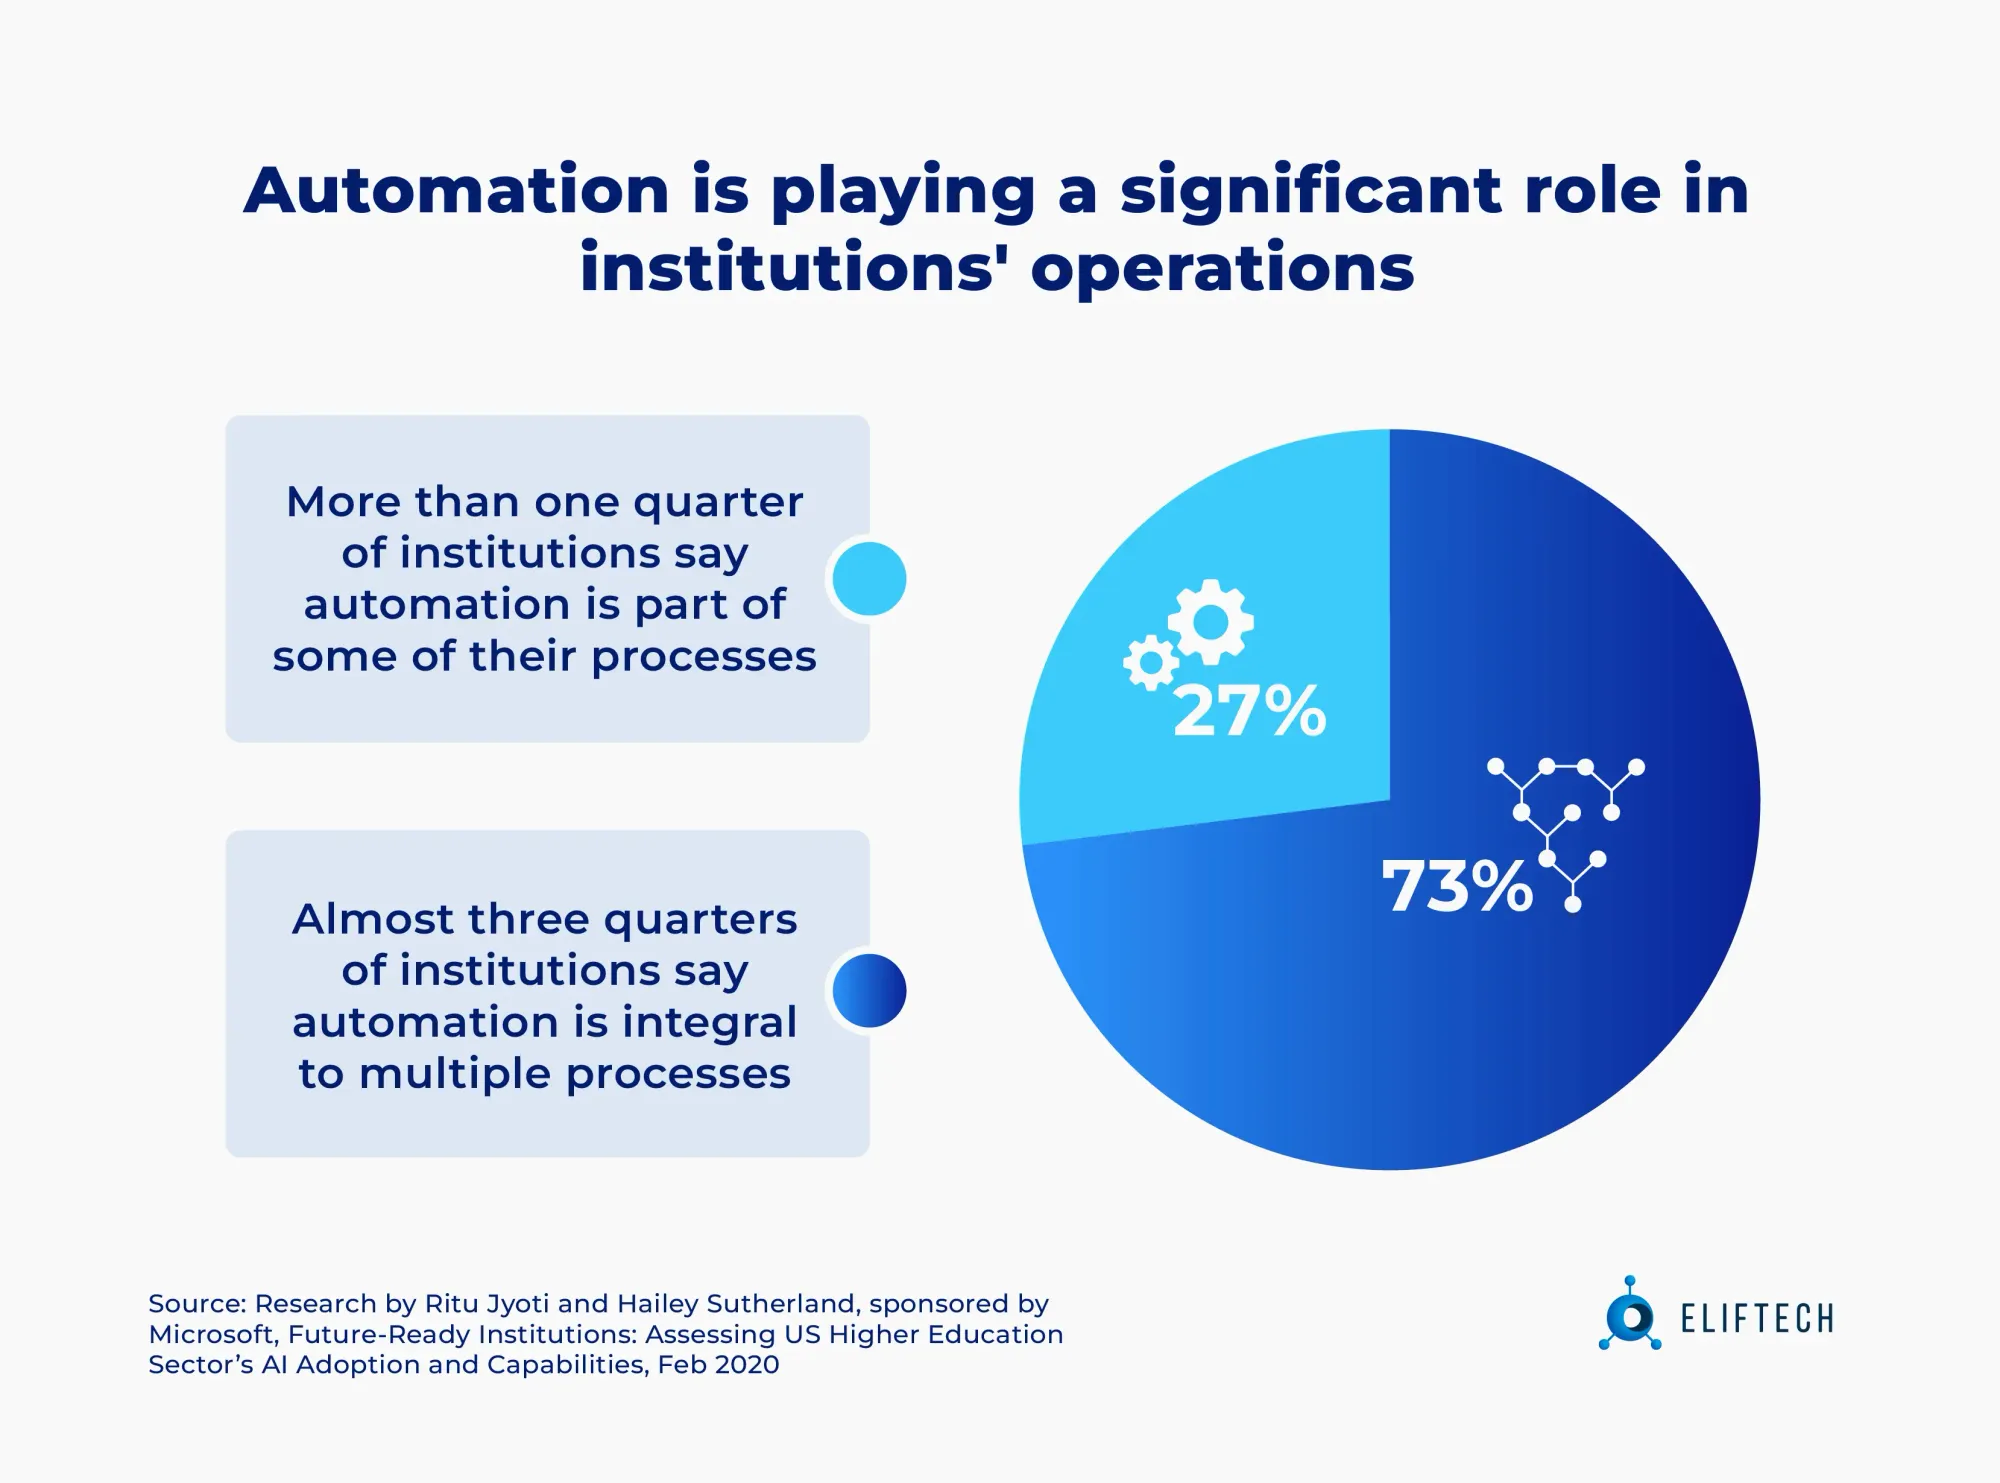 Automation is key in running institutions